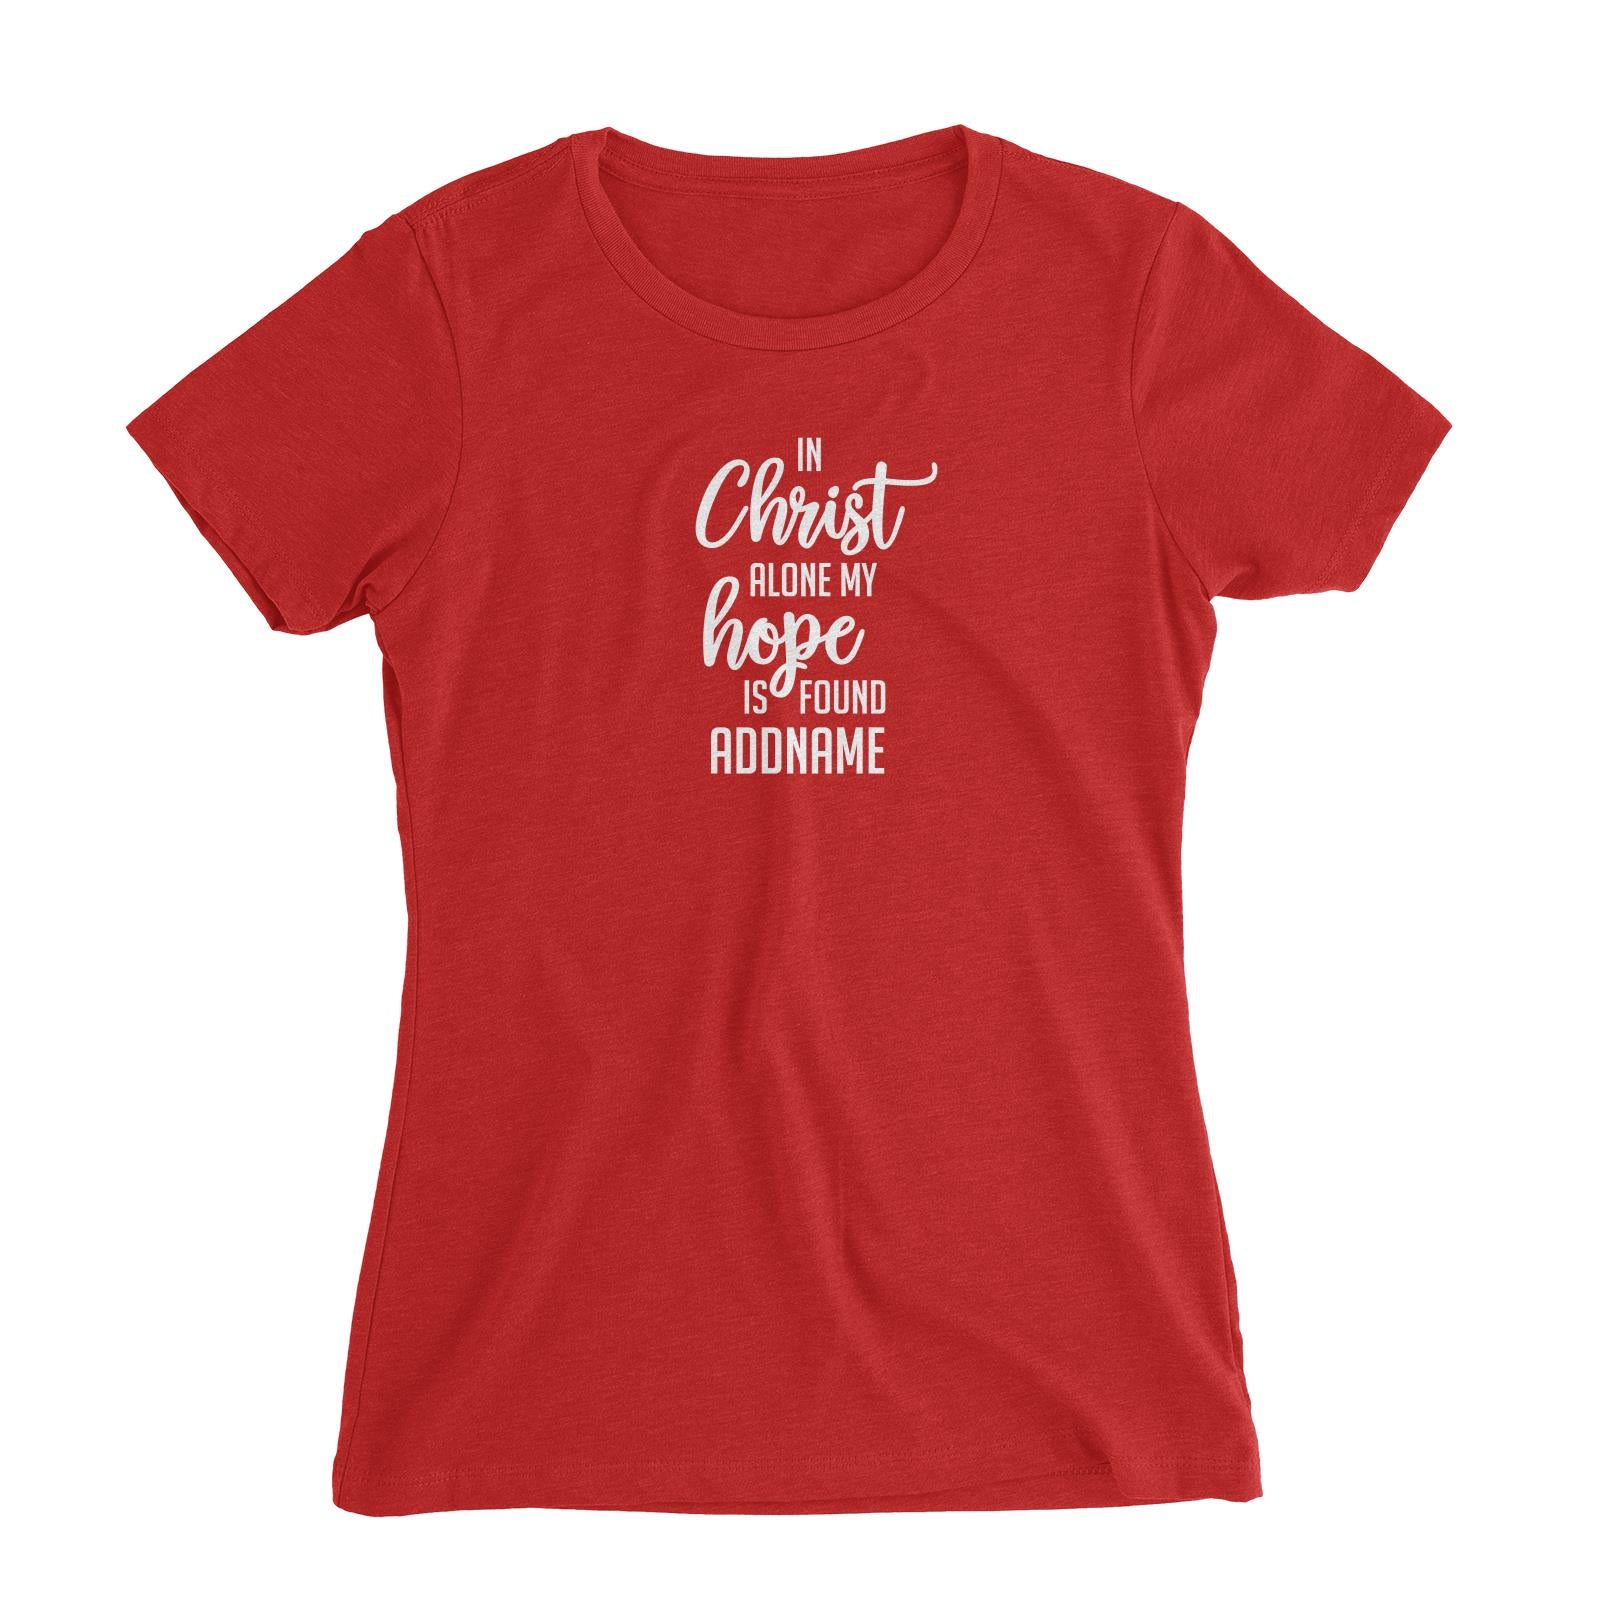 Christian Series In Christ Alone My Hope Is Found Addname Women Slim Fit T-Shirt